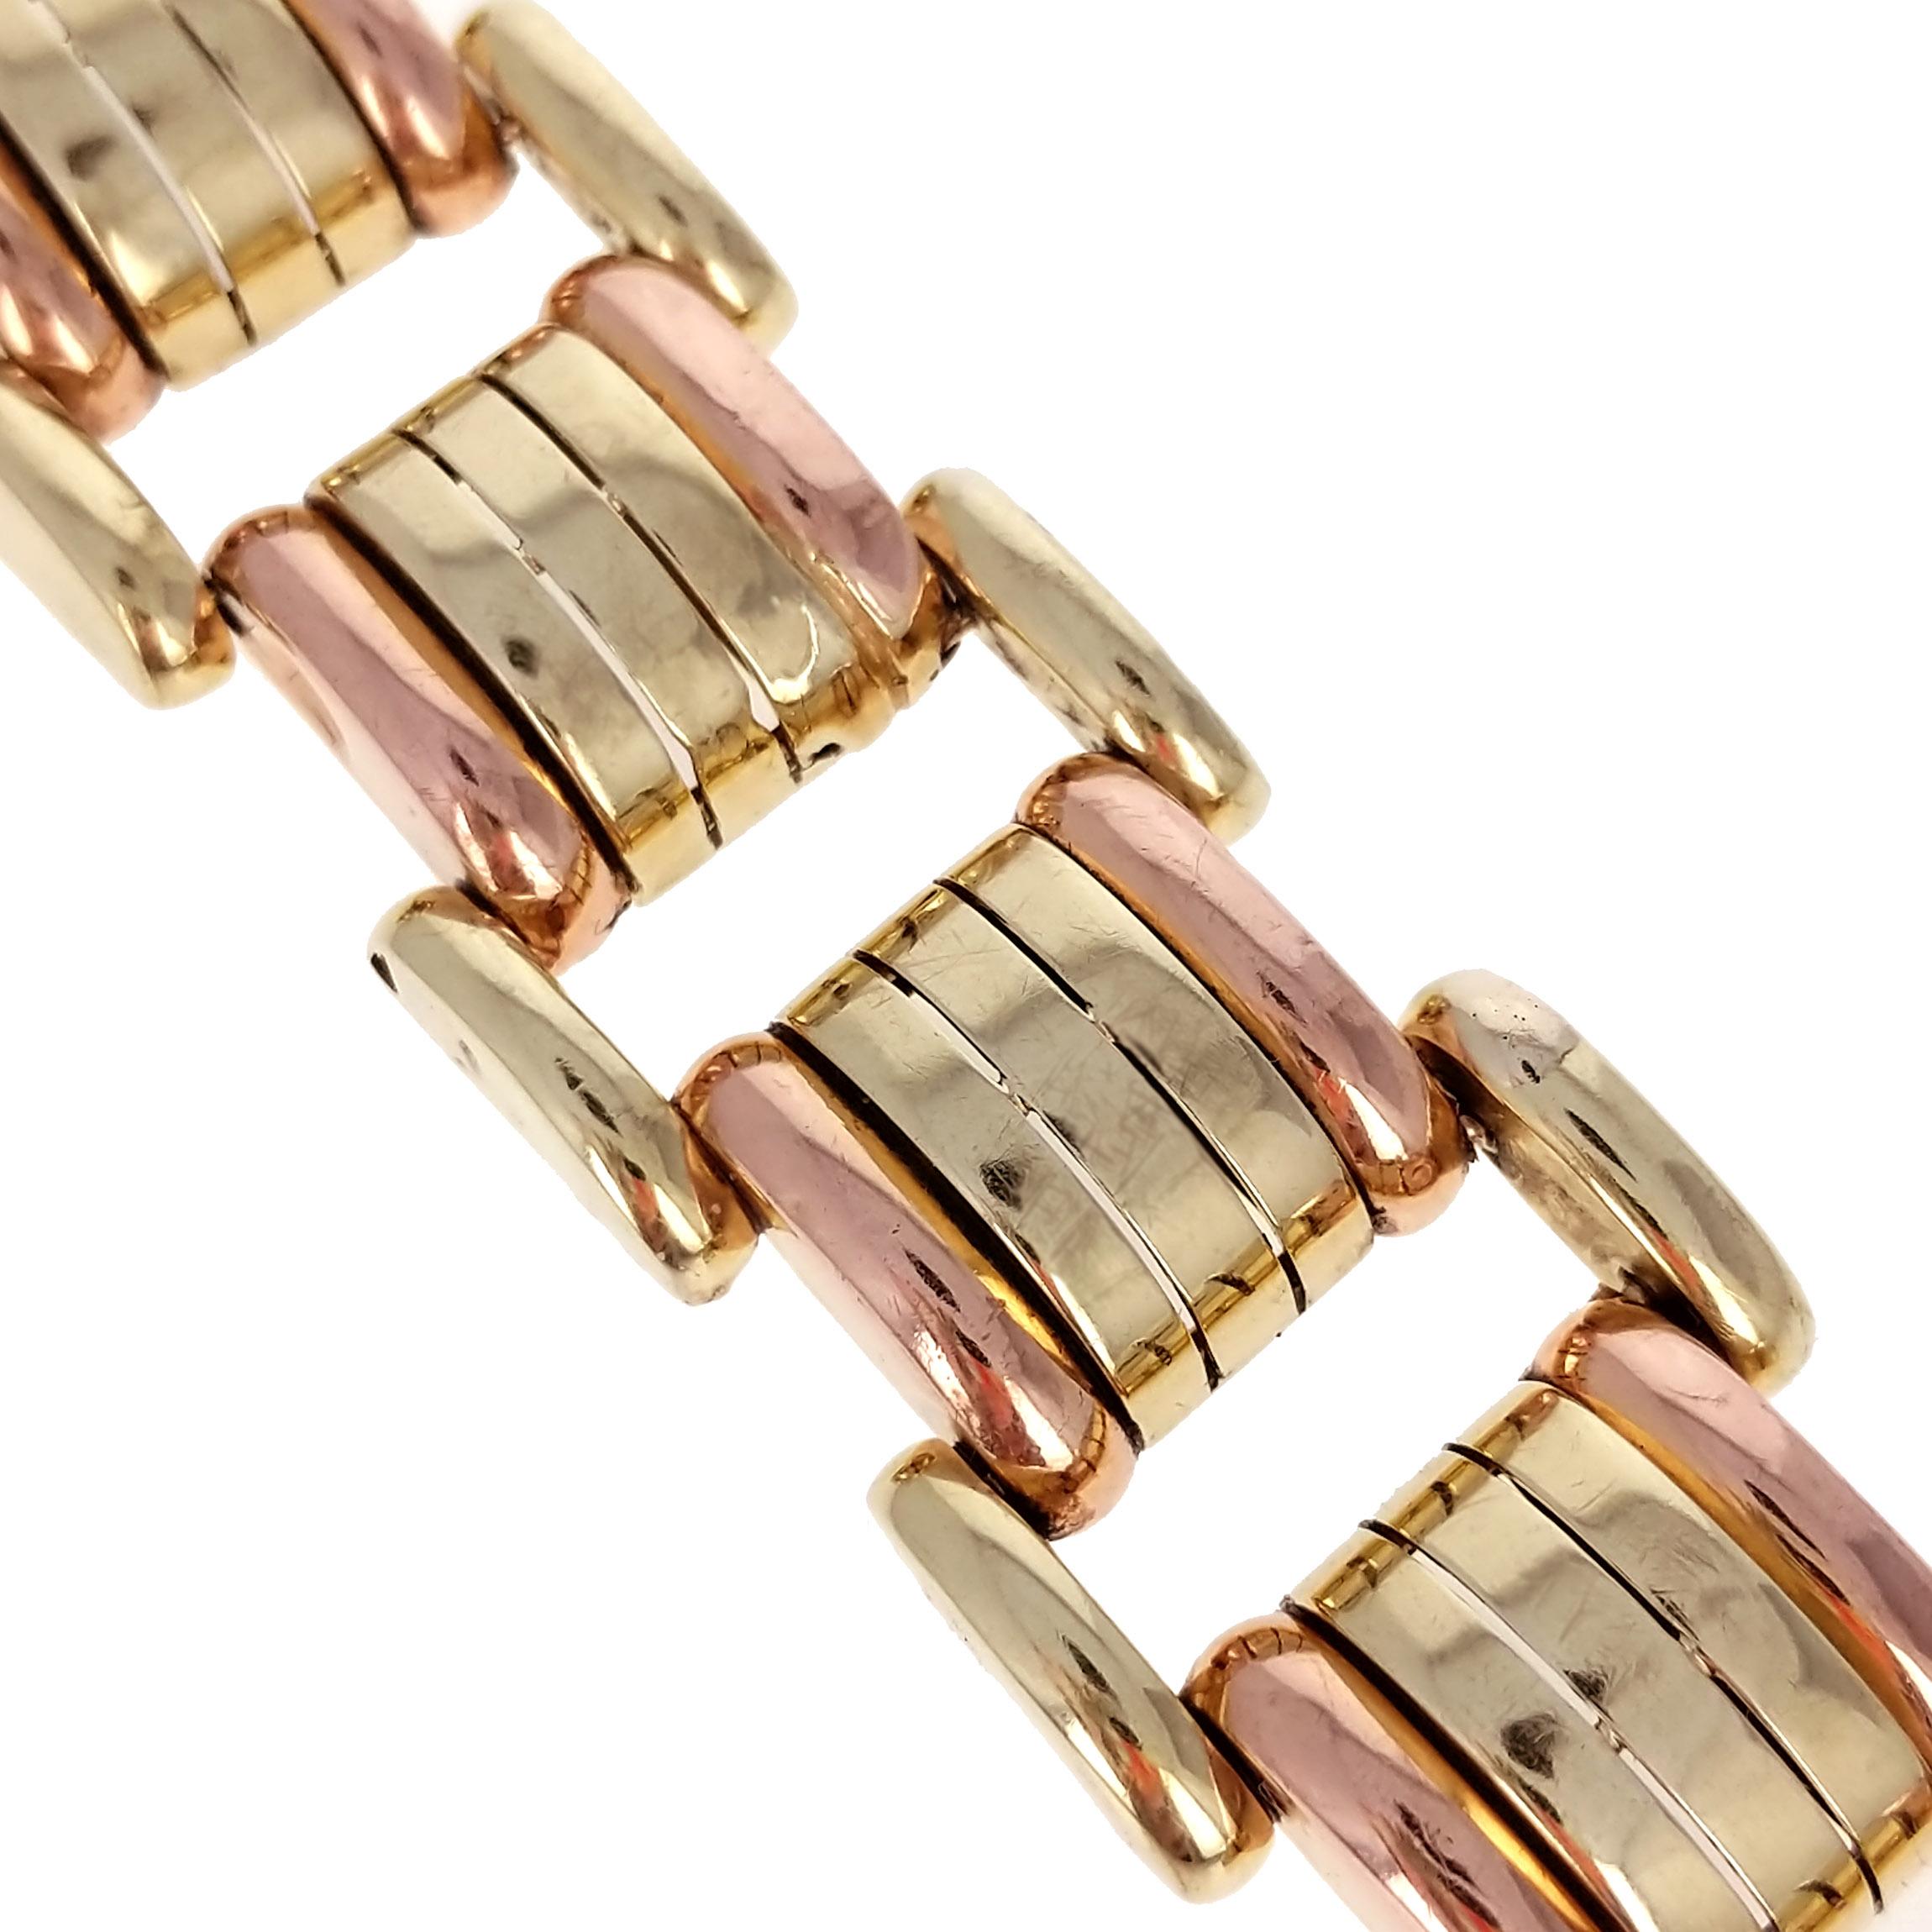 A Retro, 1940's, yellow and rose gold combination tank bracelet. 14k gold and hollow. With Yugoslavian marks for 14k gold. It is very easy to wear as an everyday item. There are minor dents that are seen in very close inspection. Please review